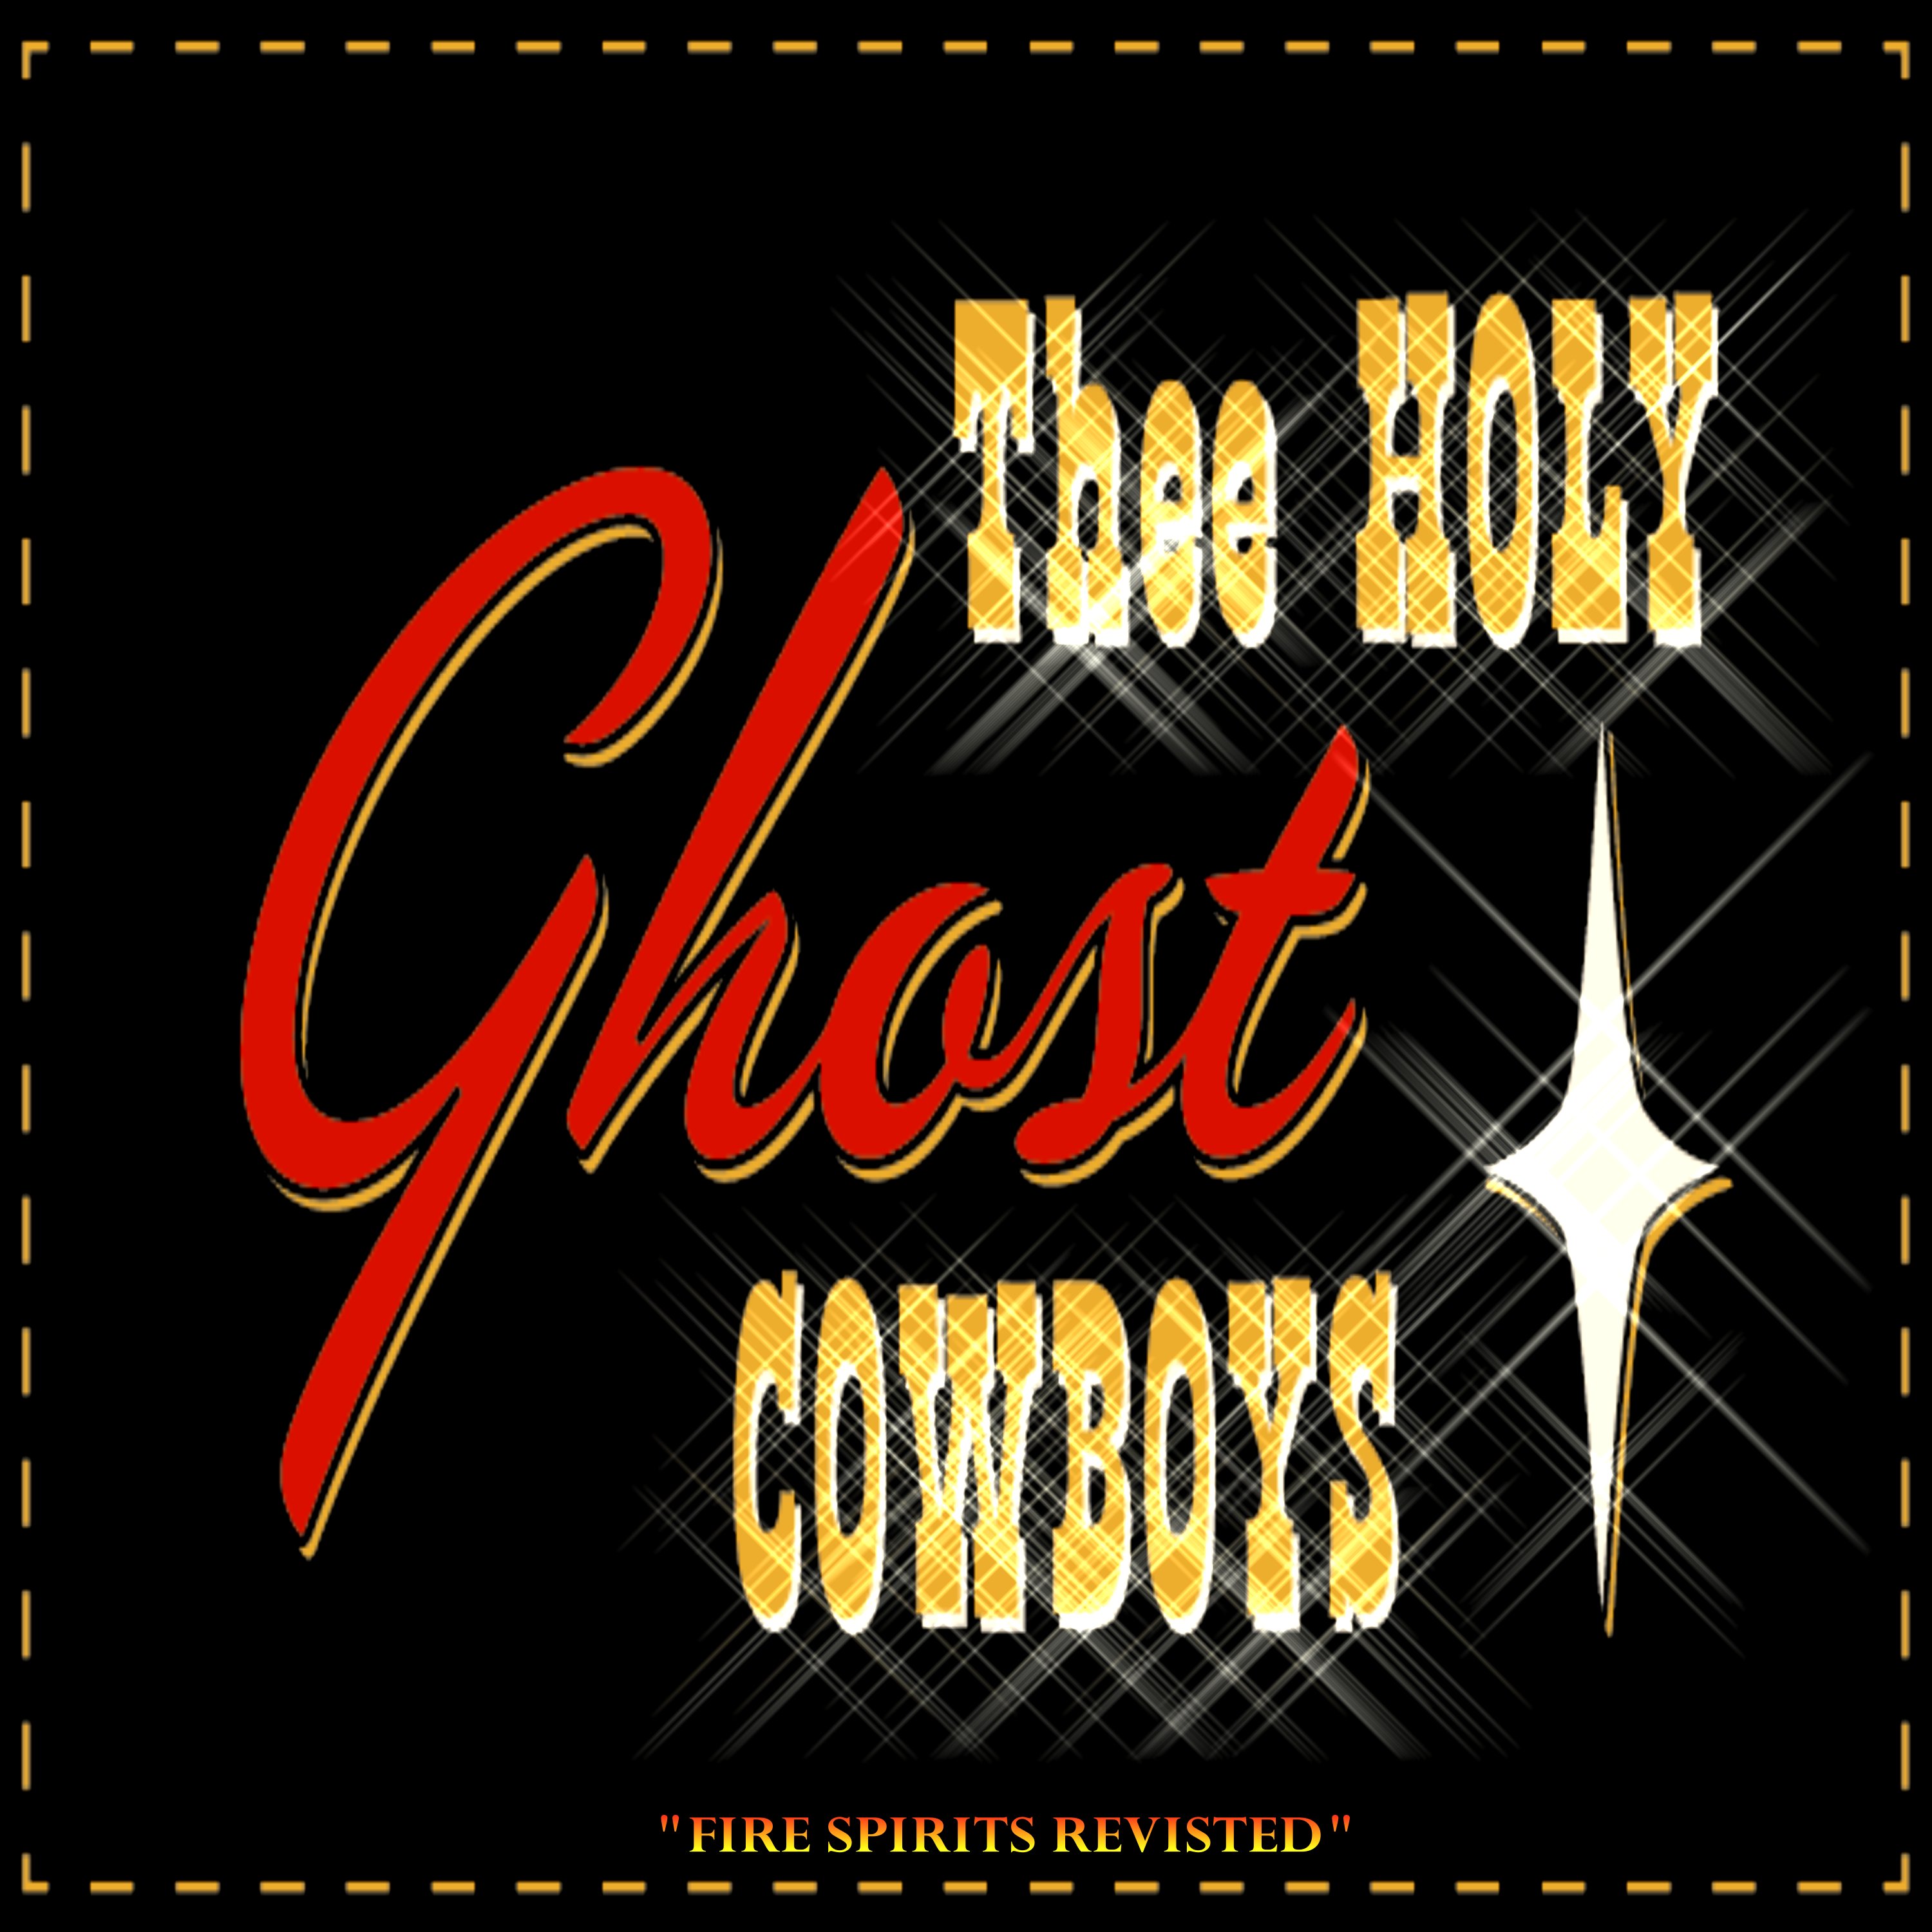 The Holy Ghost Cowboys Cover Front